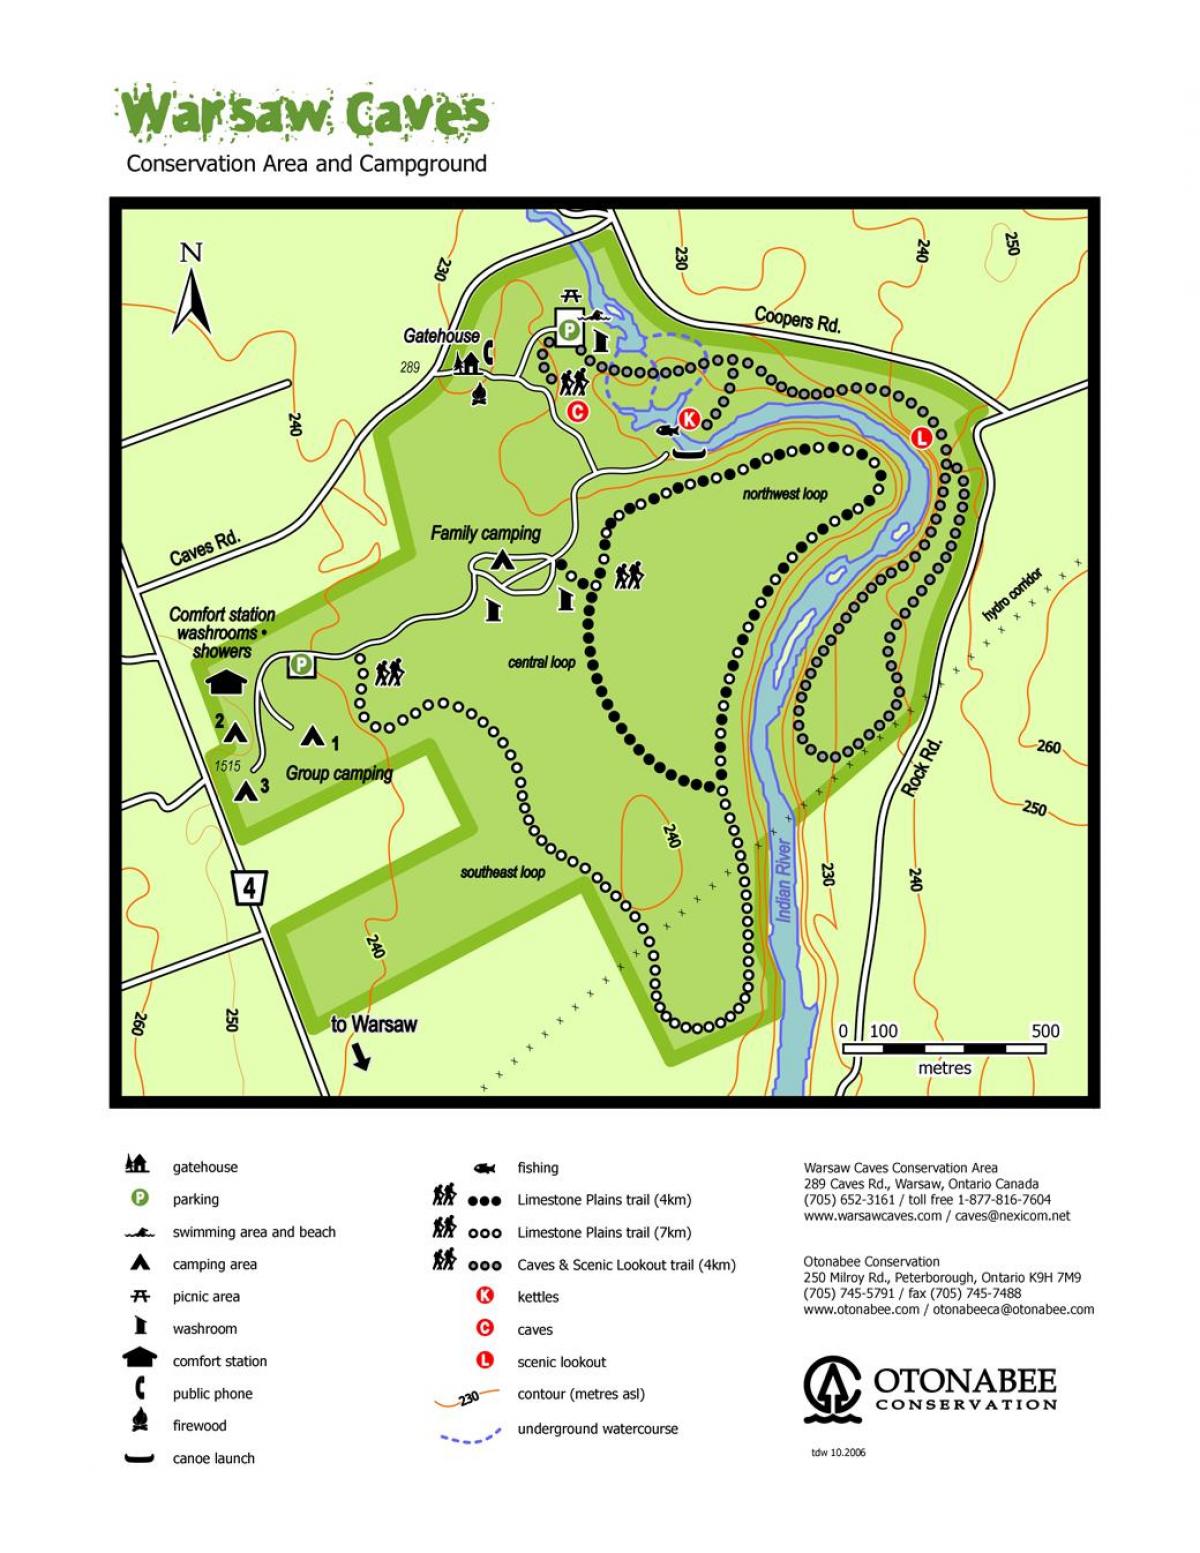 Map of Warsaw caves 